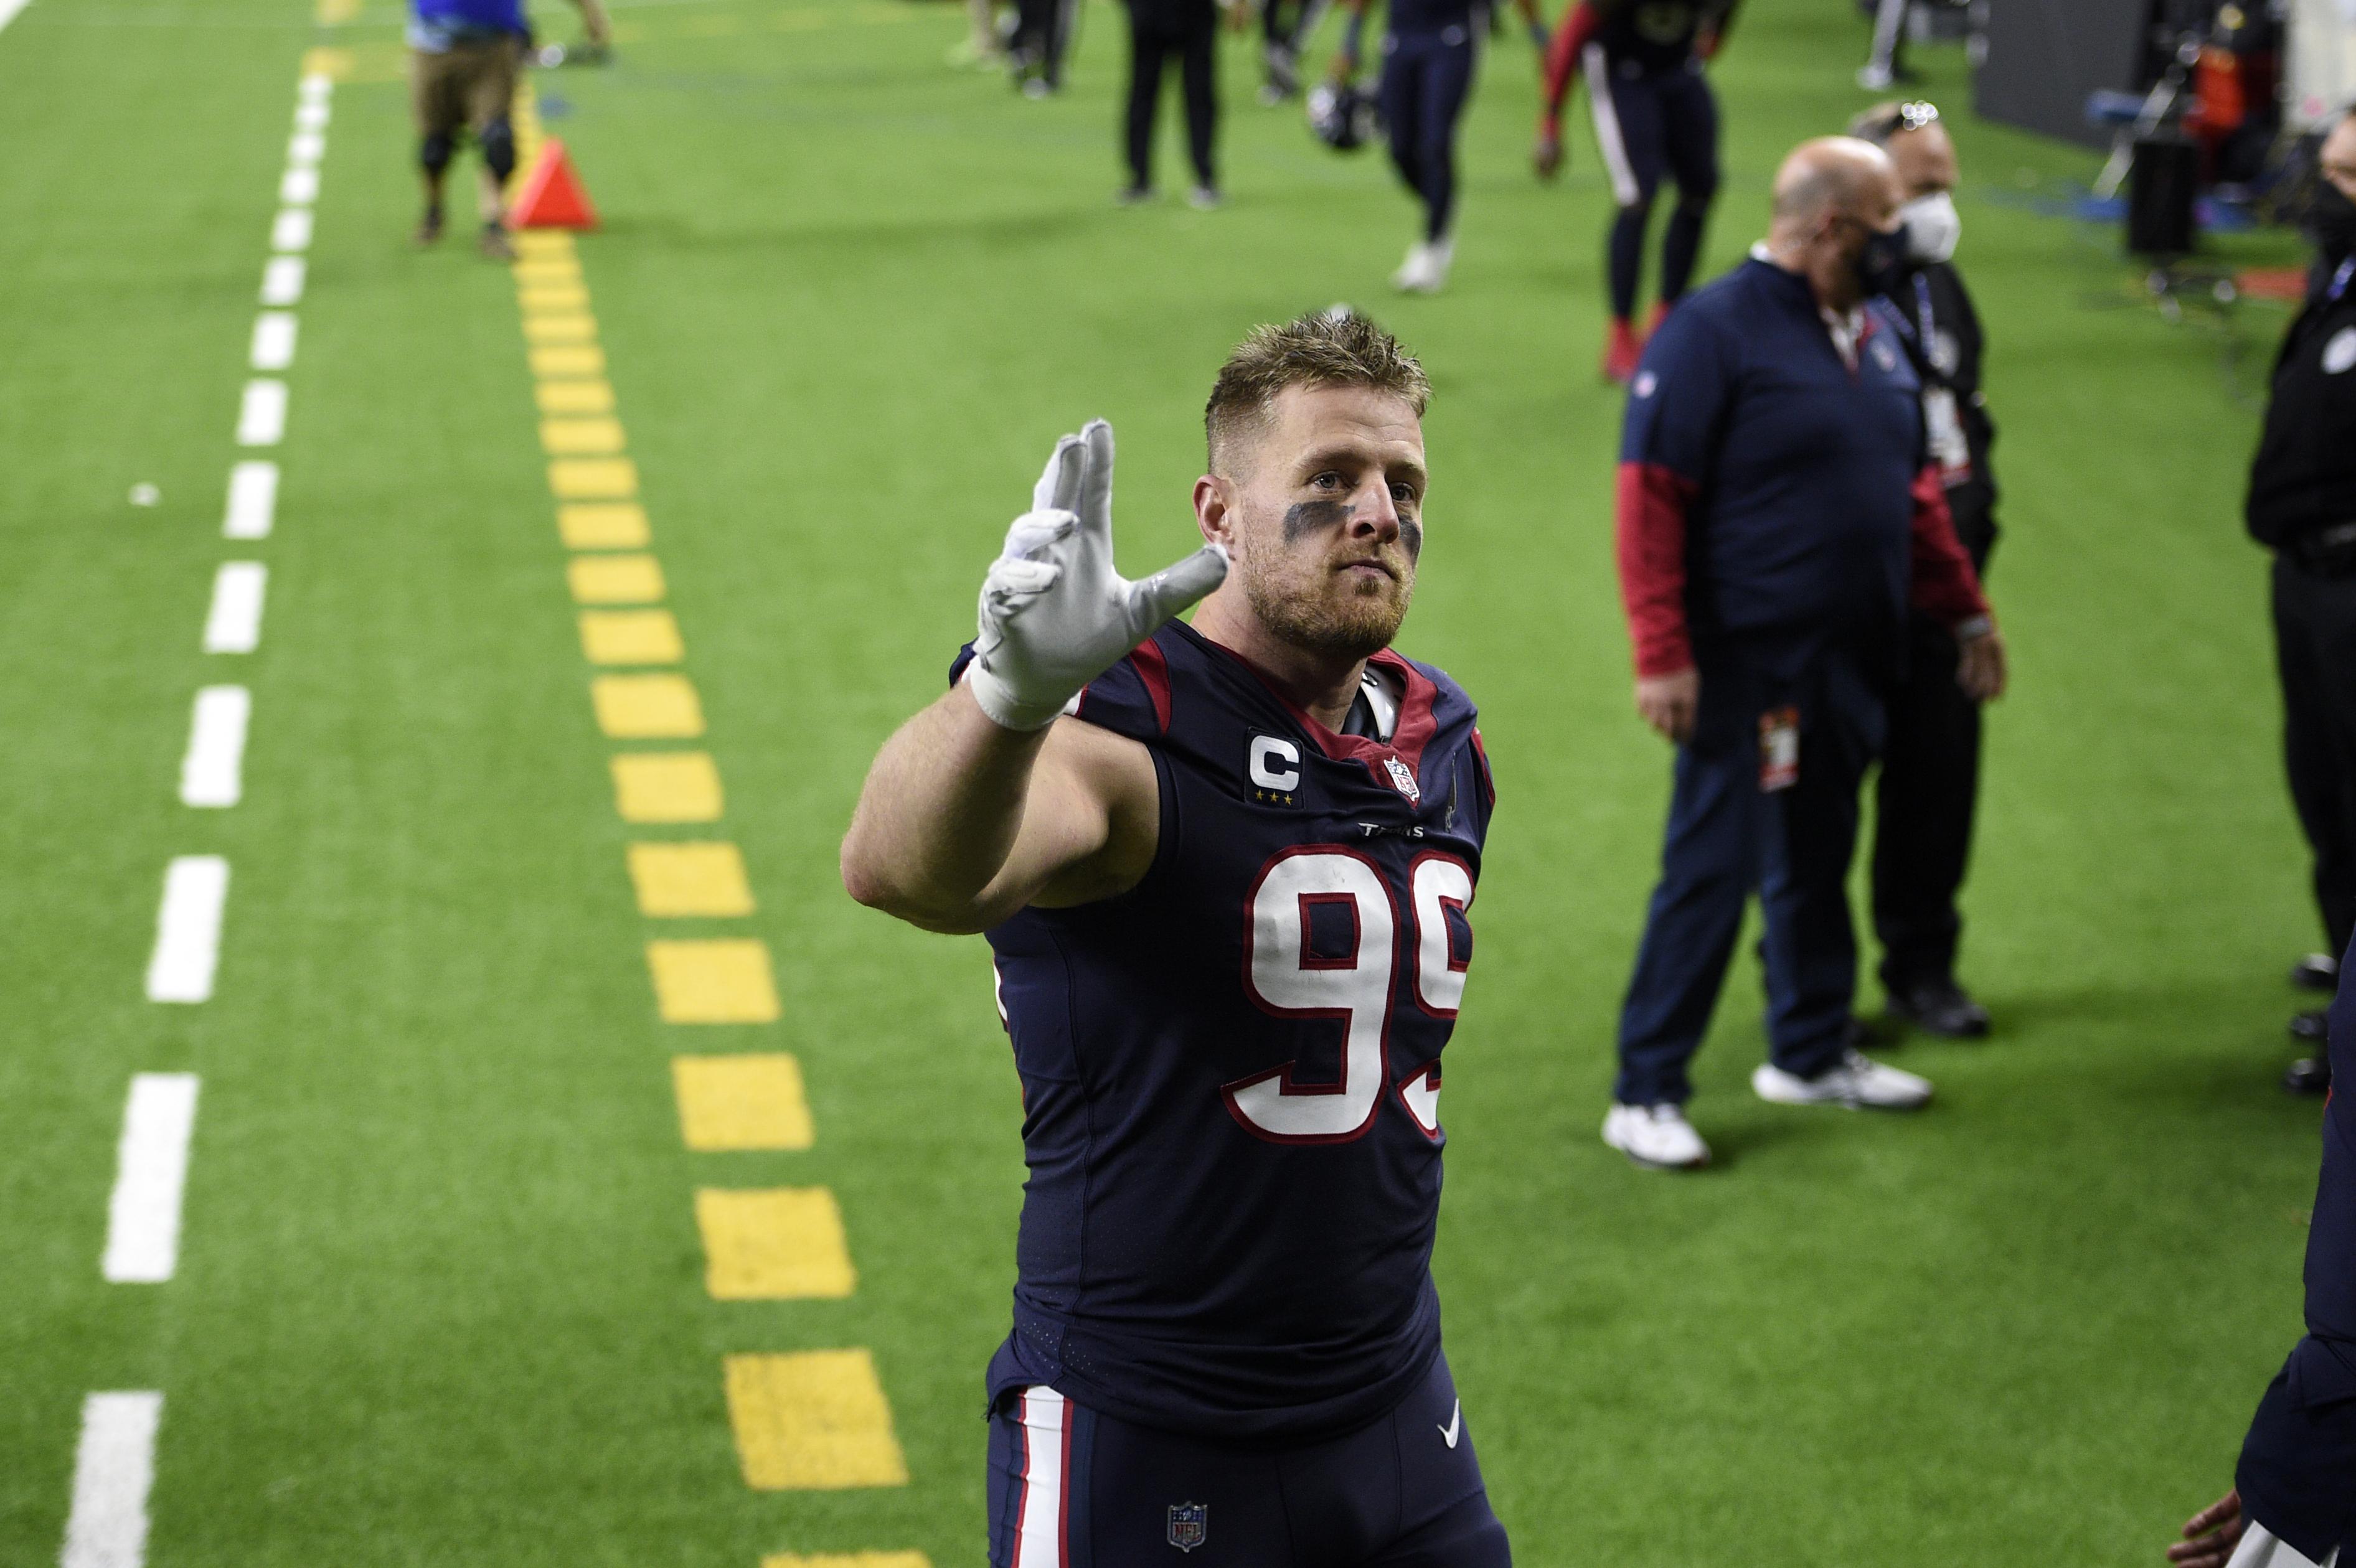 Jj watt releases his phone number to fans